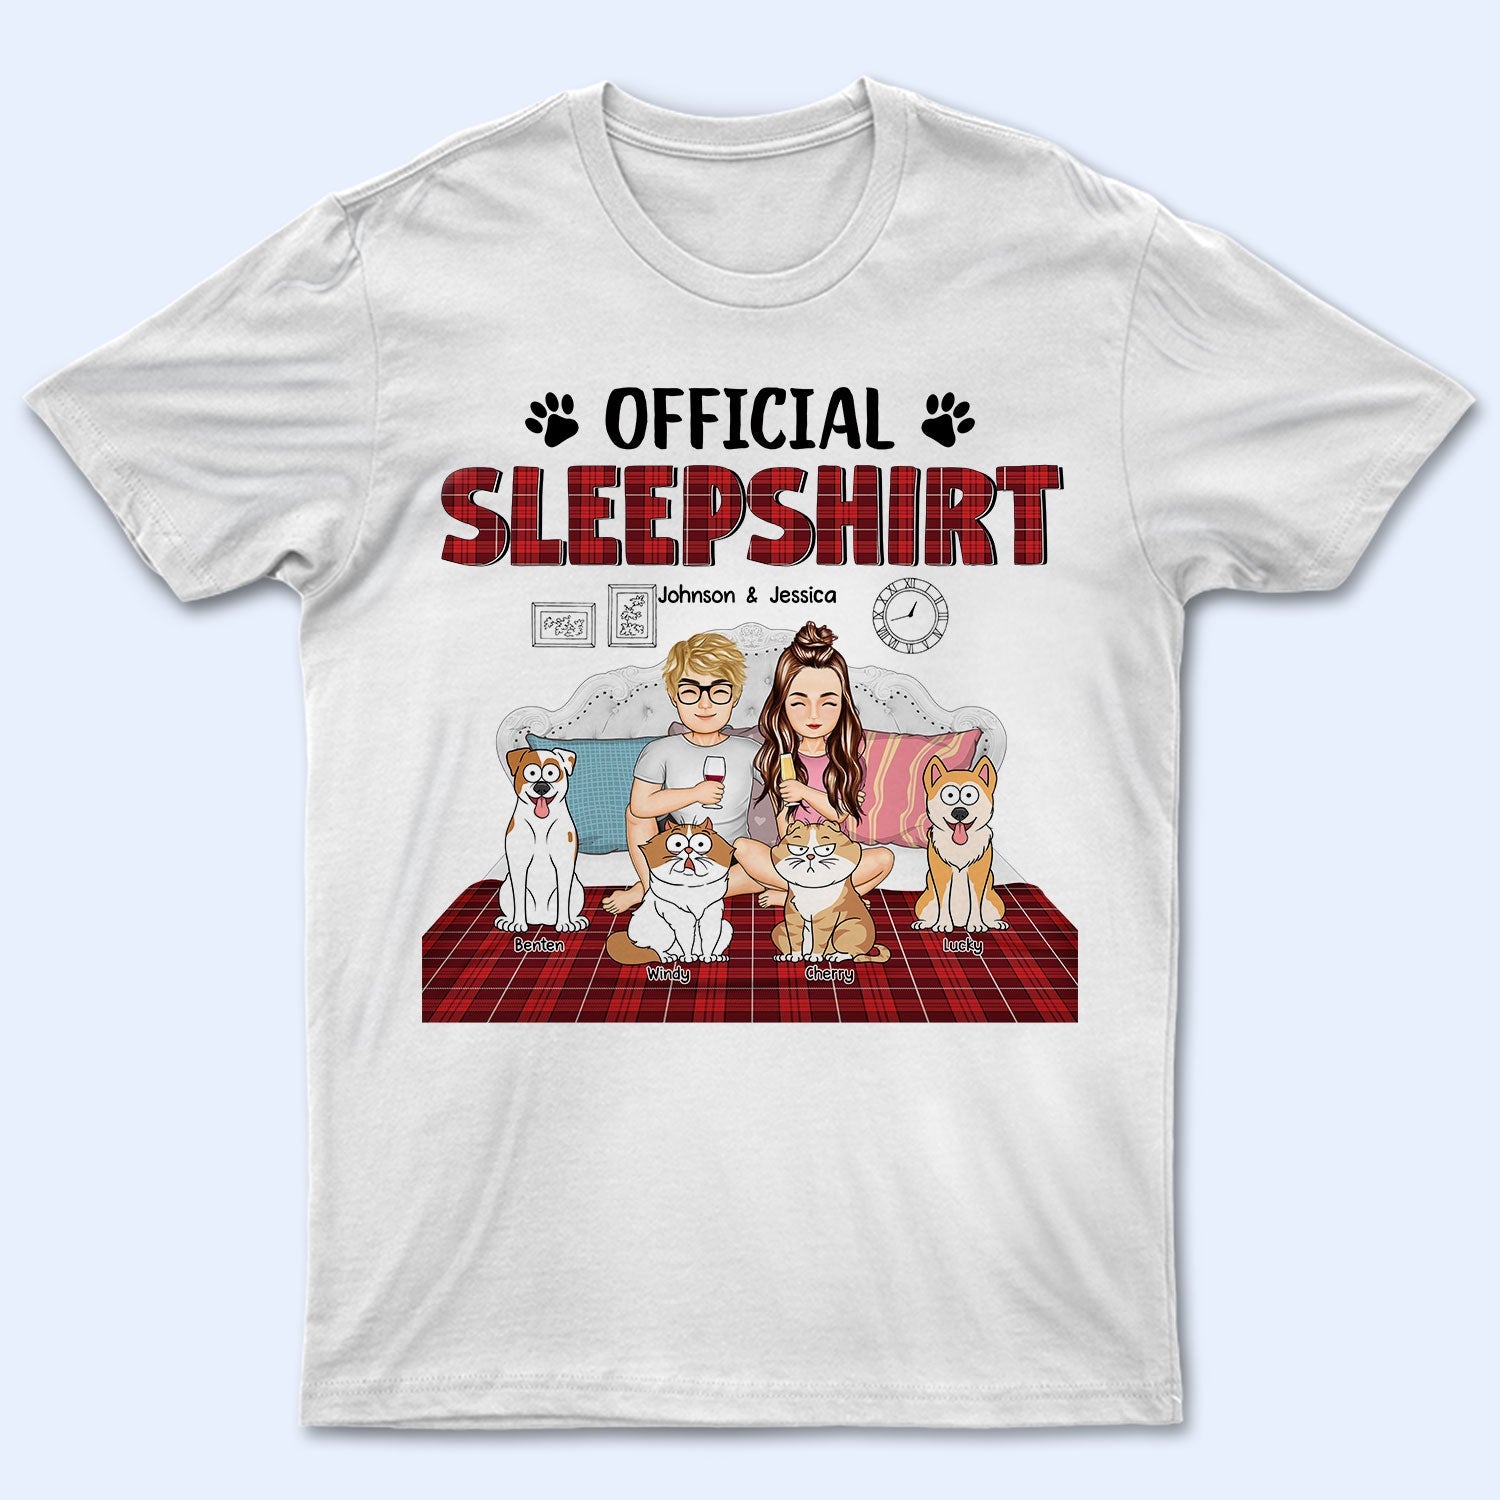 Official Sleepshirt - Gift For Pet Lovers - Personalized T Shirt